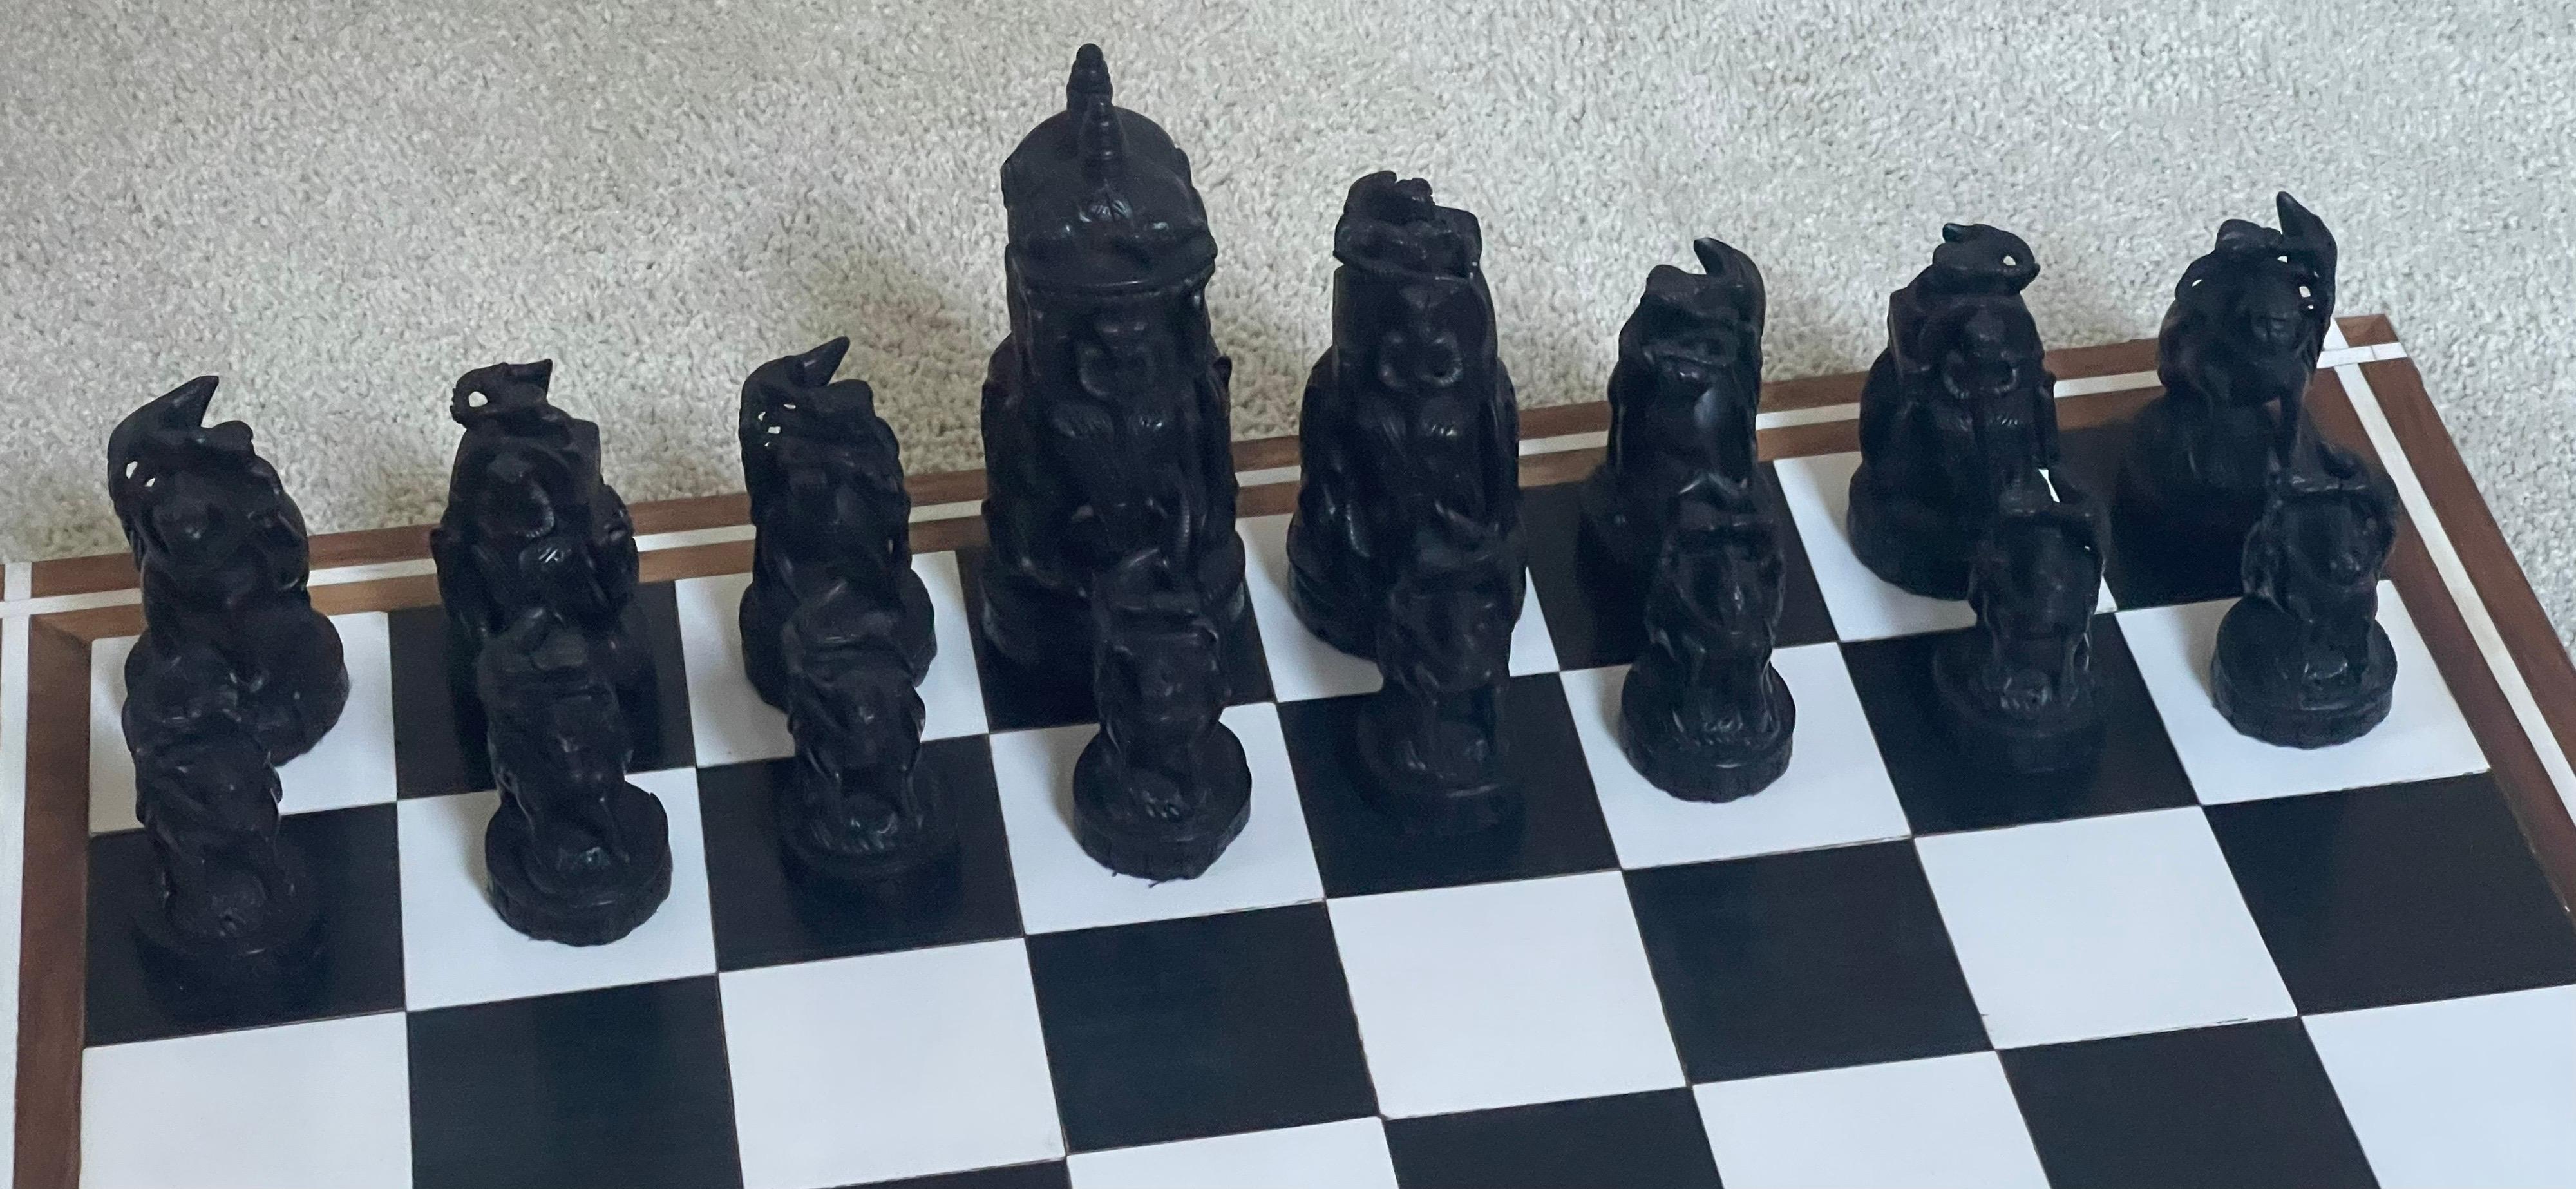 Large Vintage Rajasthani / Indian Chess Set with Board For Sale 2